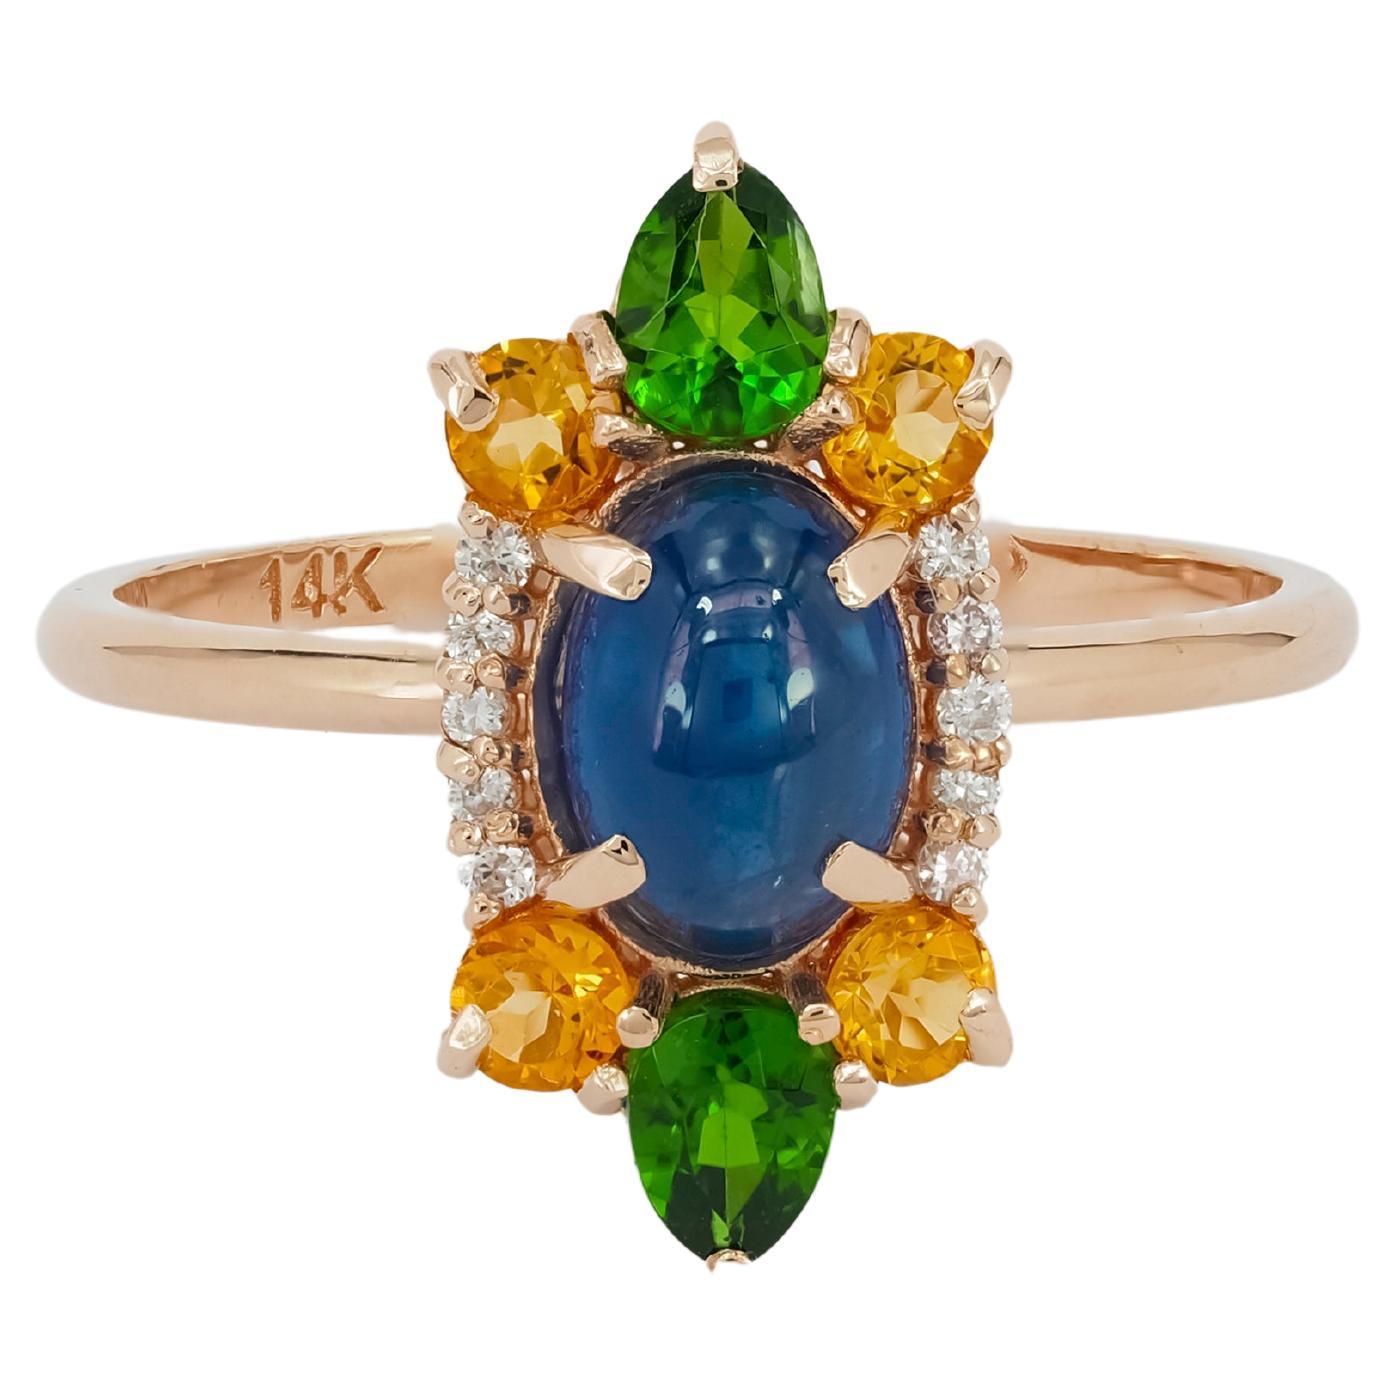 For Sale:  14k Gold Ring with Sapphire, Chrome Diopside and Diamonds